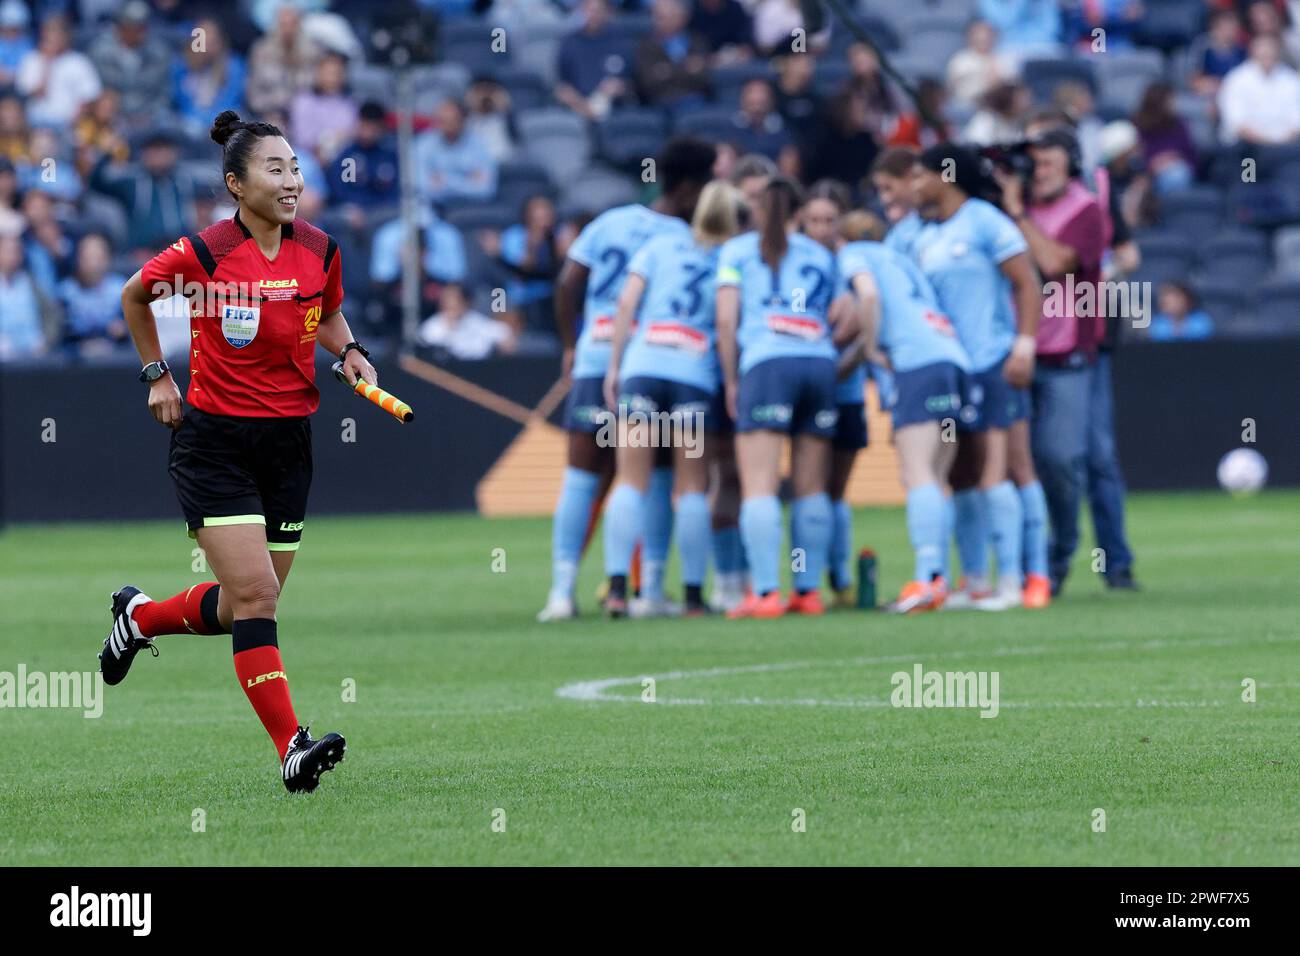 Sydney, Australia. 30th Apr, 2023. Assistant referee, Mi Suk Park runs to check the nets before the Grand Final match between Western United and Sydney FC at CommBank Stadium on April 30, 2023 in Sydney, Australia Credit: IOIO IMAGES/Alamy Live News Stock Photo